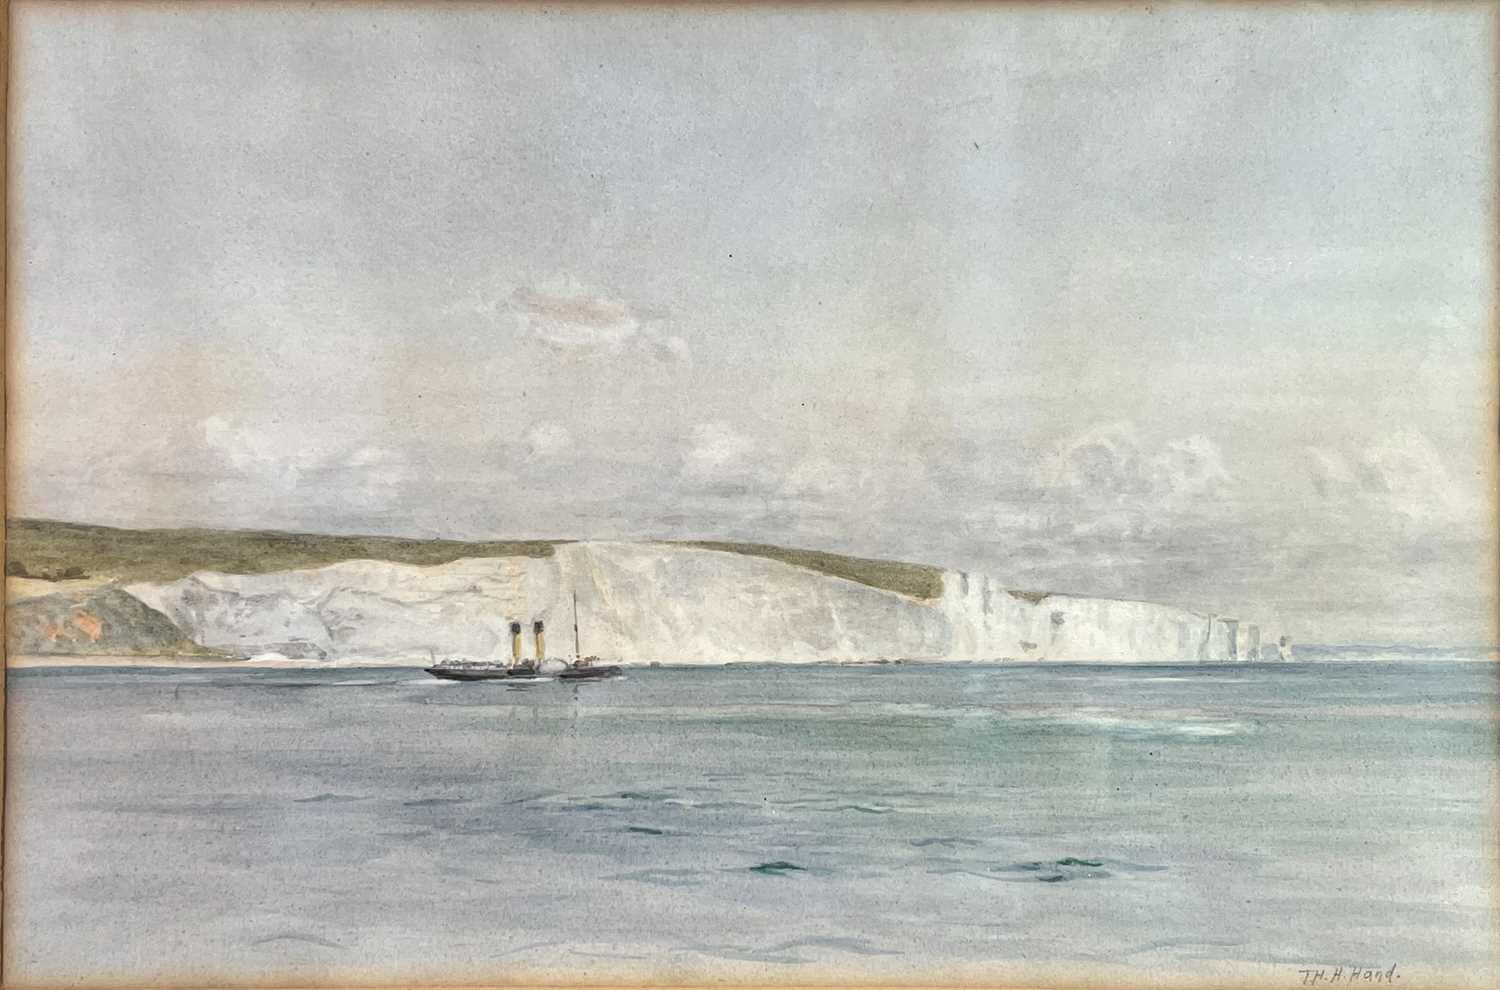 Thomas H H HAND The white cliffs of Dover Watercolour Signed 22 x 33cm